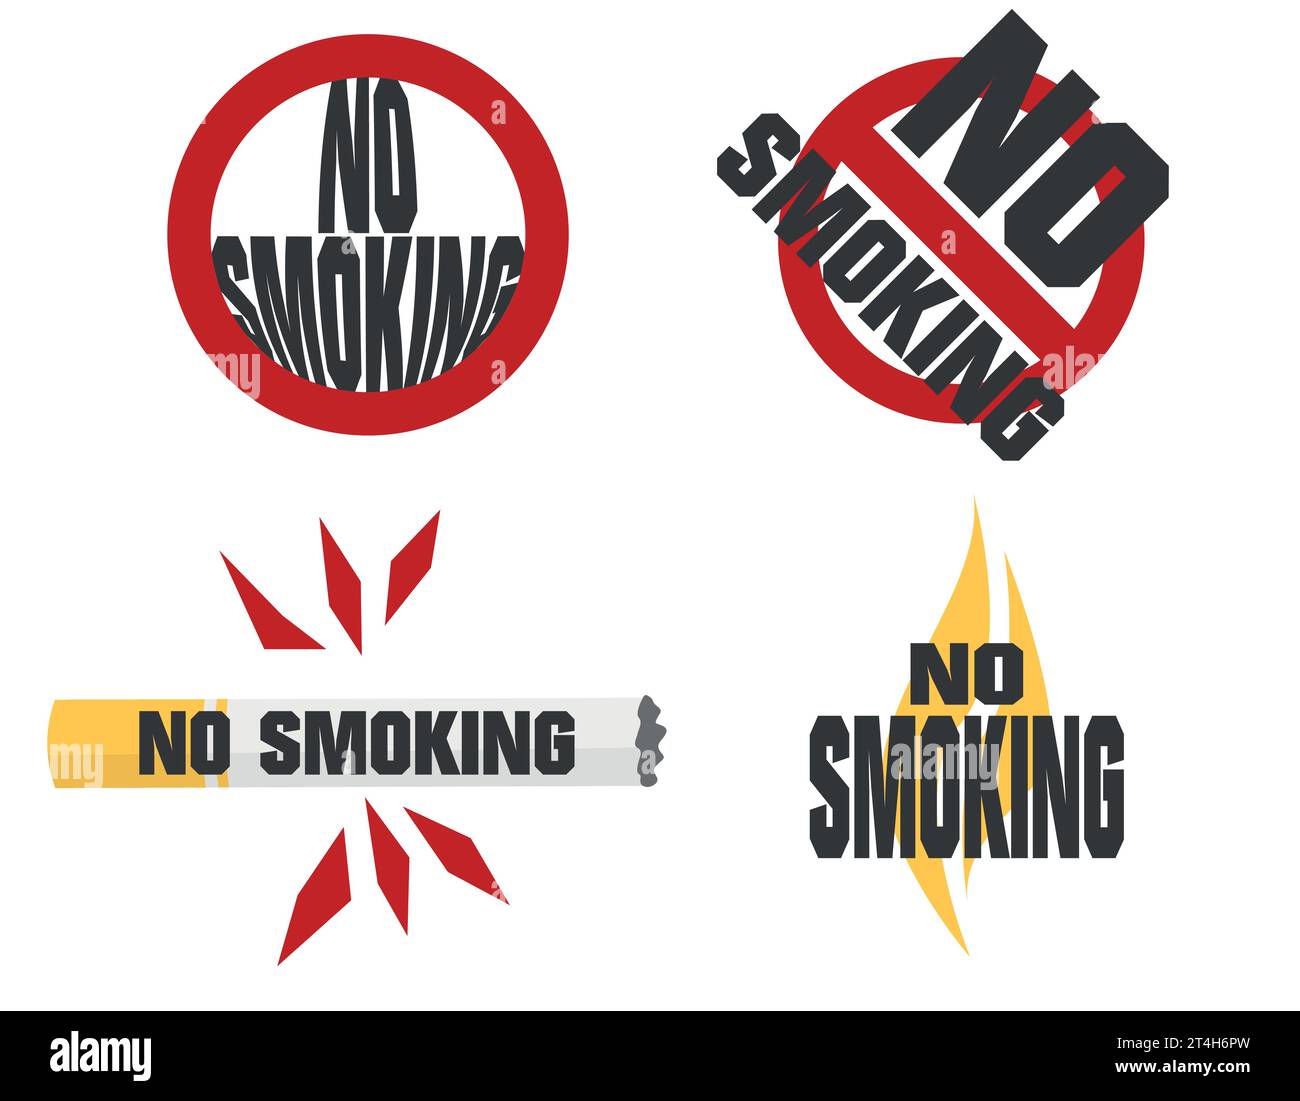 set lettering prohibition of smoking, no smoking, cigarette prohibition sign, broken cigarette, harm to health Stock Vector